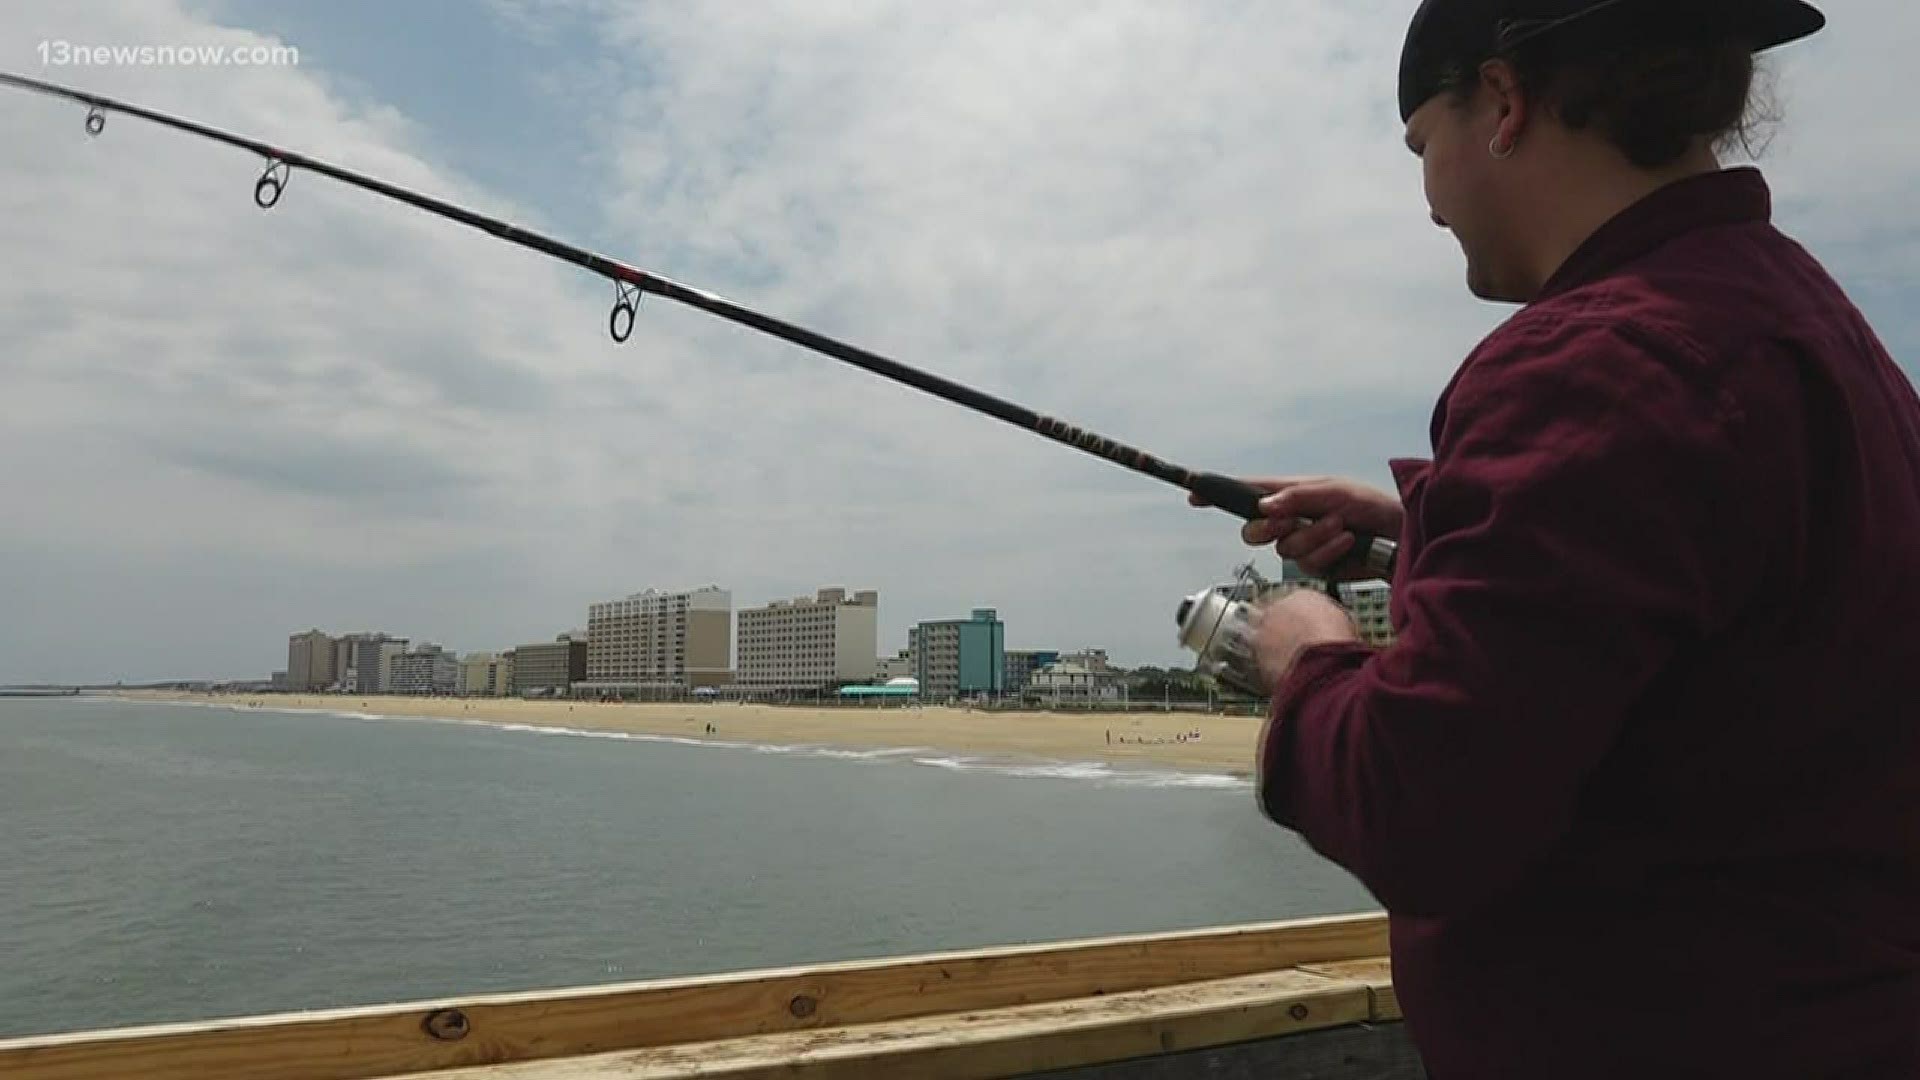 The Virginia Beach Fishing Pier has been open to visitors even while some places closed down during the coronavirus. 13News Now Scott DePuy has more.